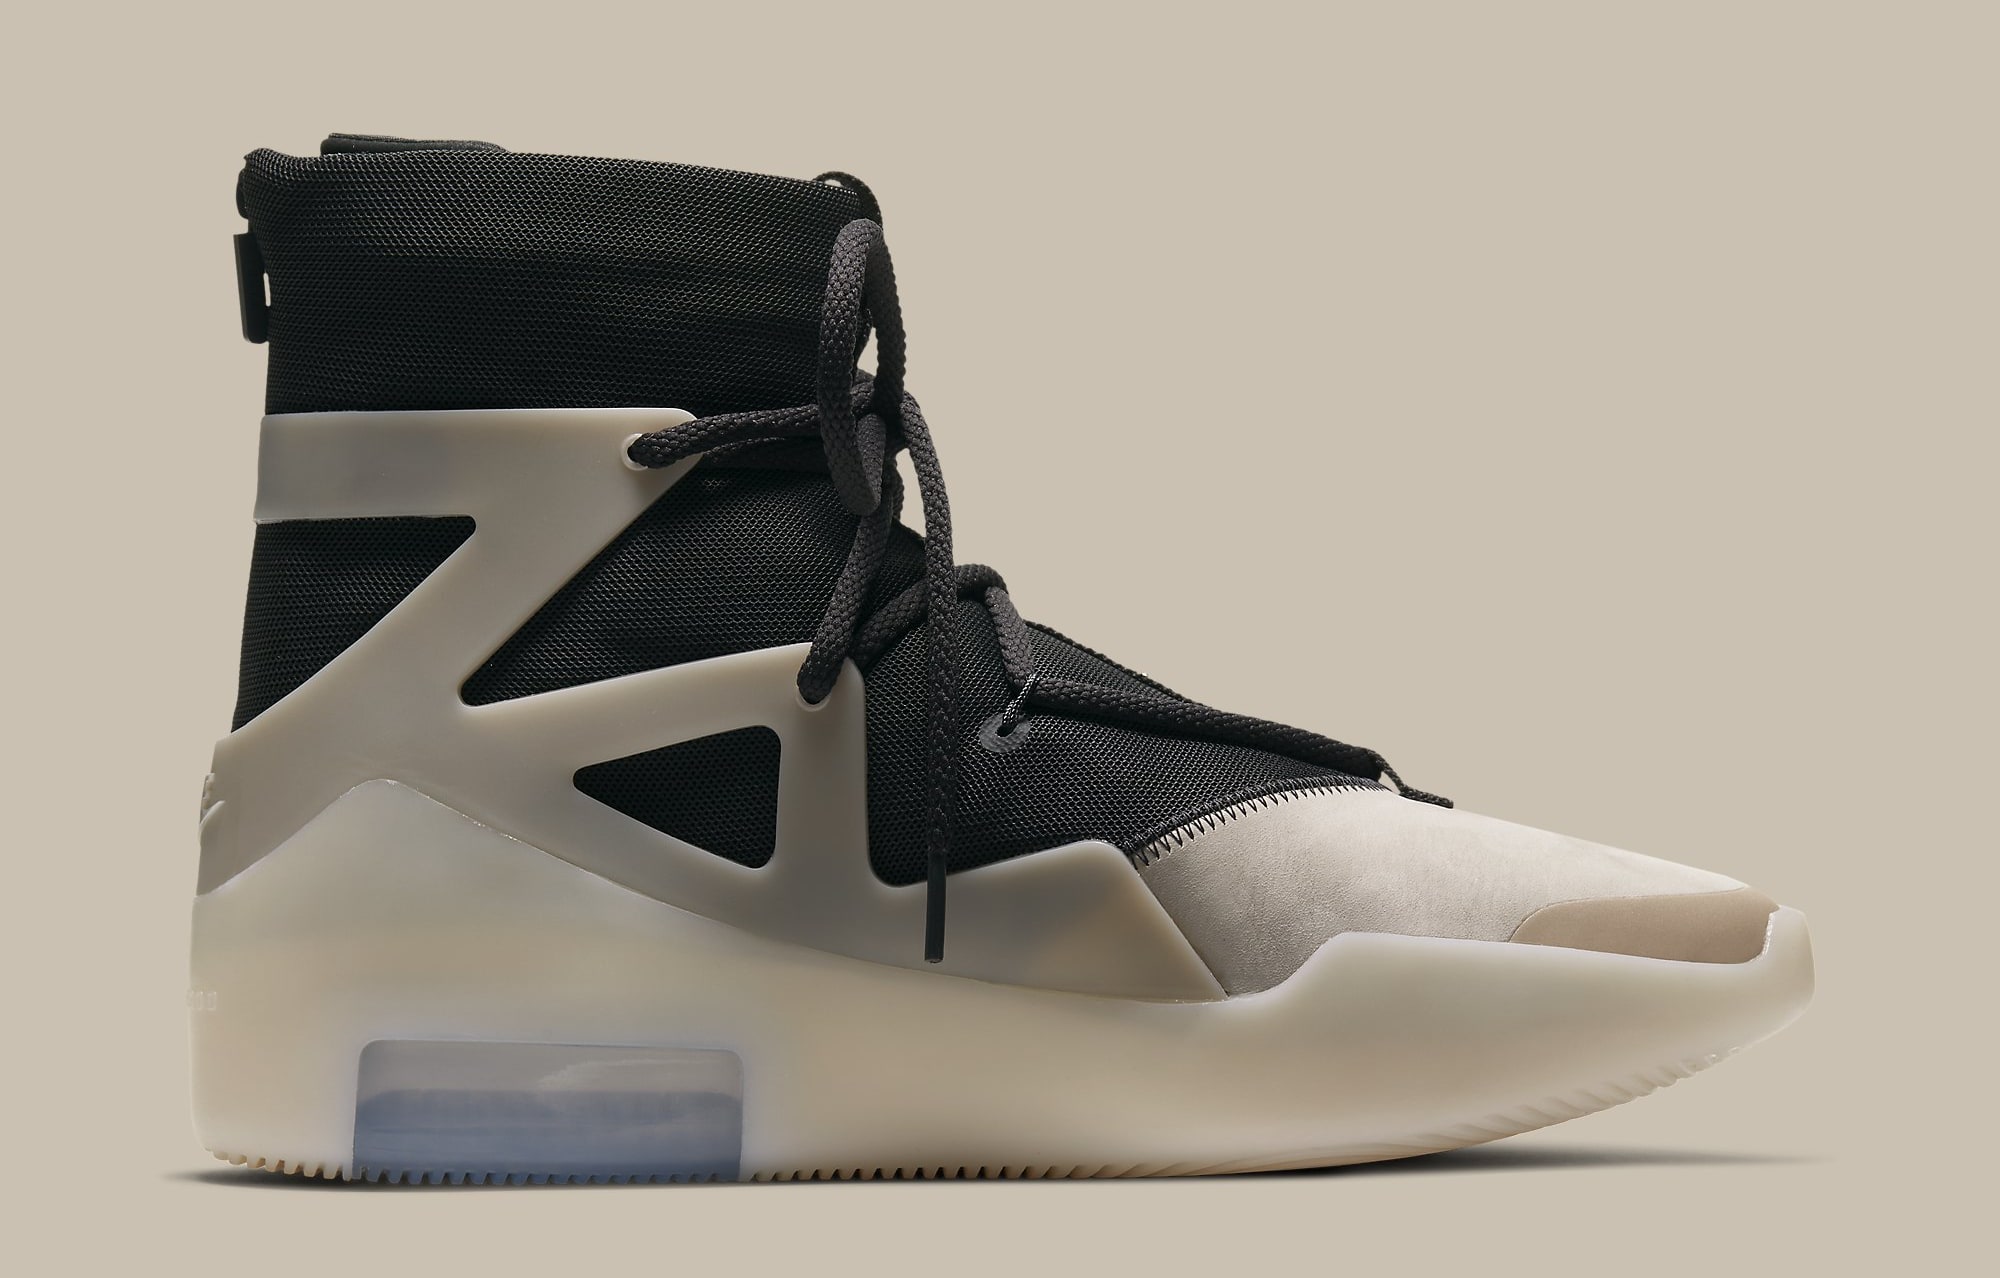 Are 'String' Air Fear of God 1s Dropping Again? | Complex